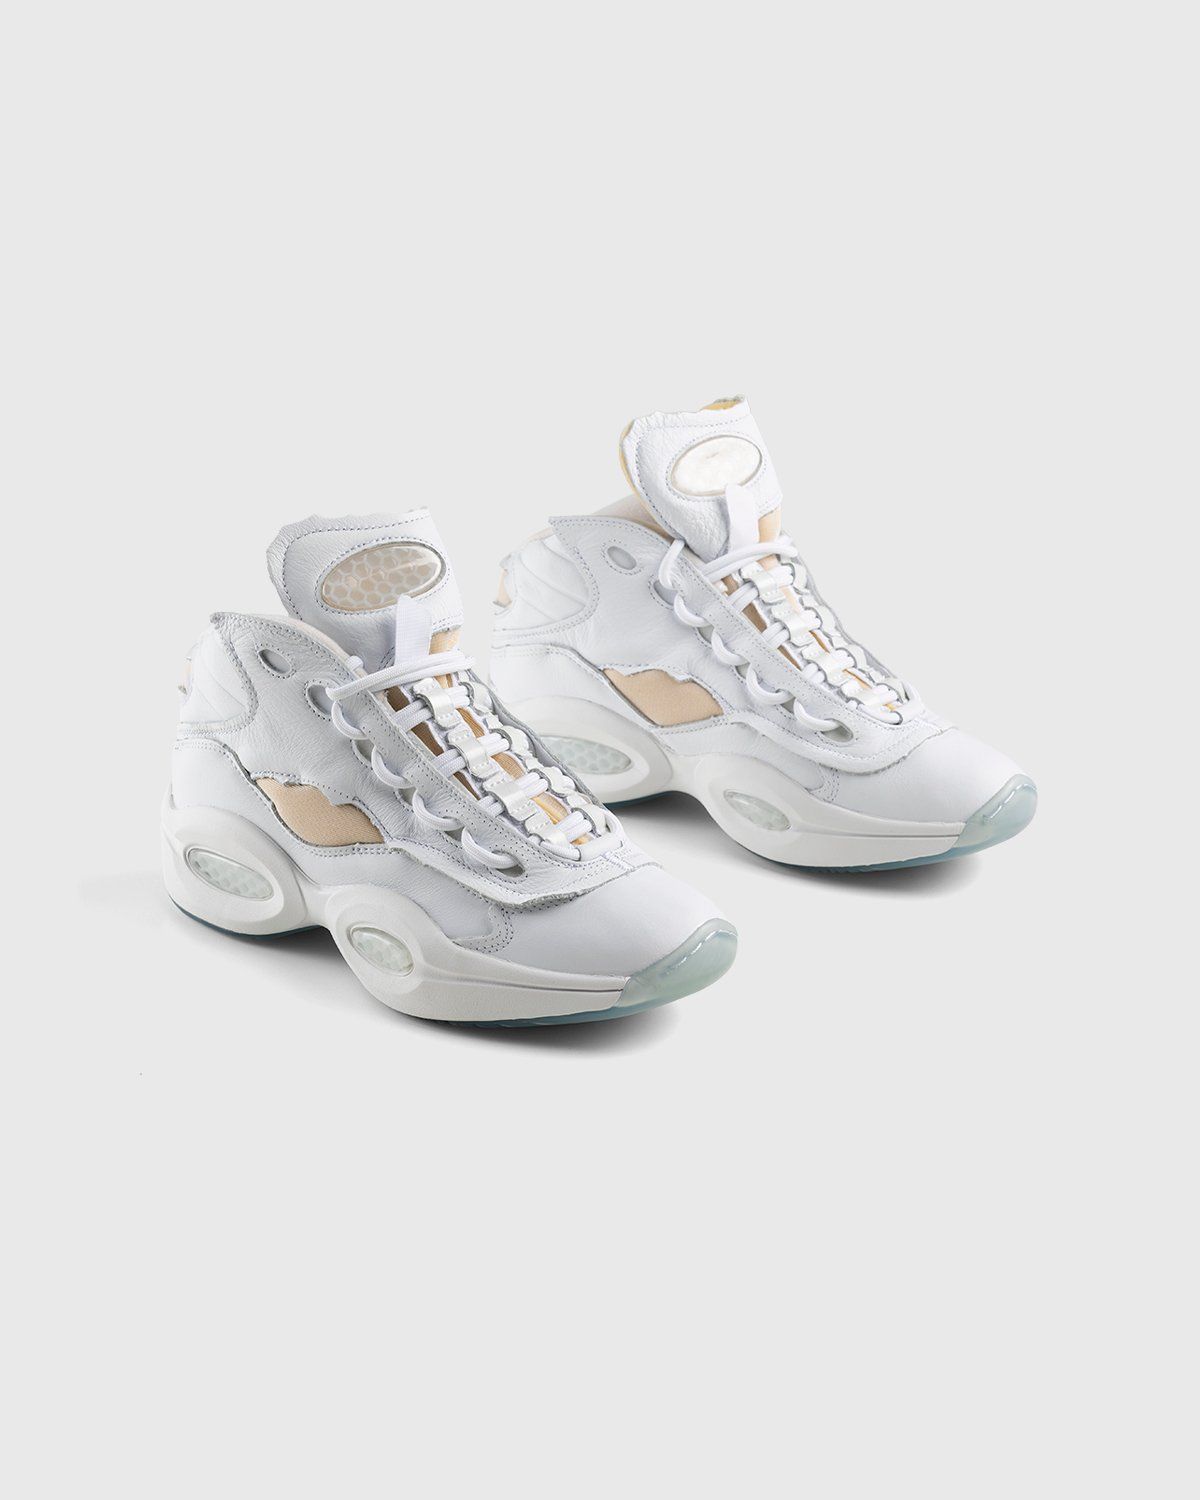 Reebok x Maison Margiela – Question Mid Memory Of White - High Top Sneakers - White - Image 4